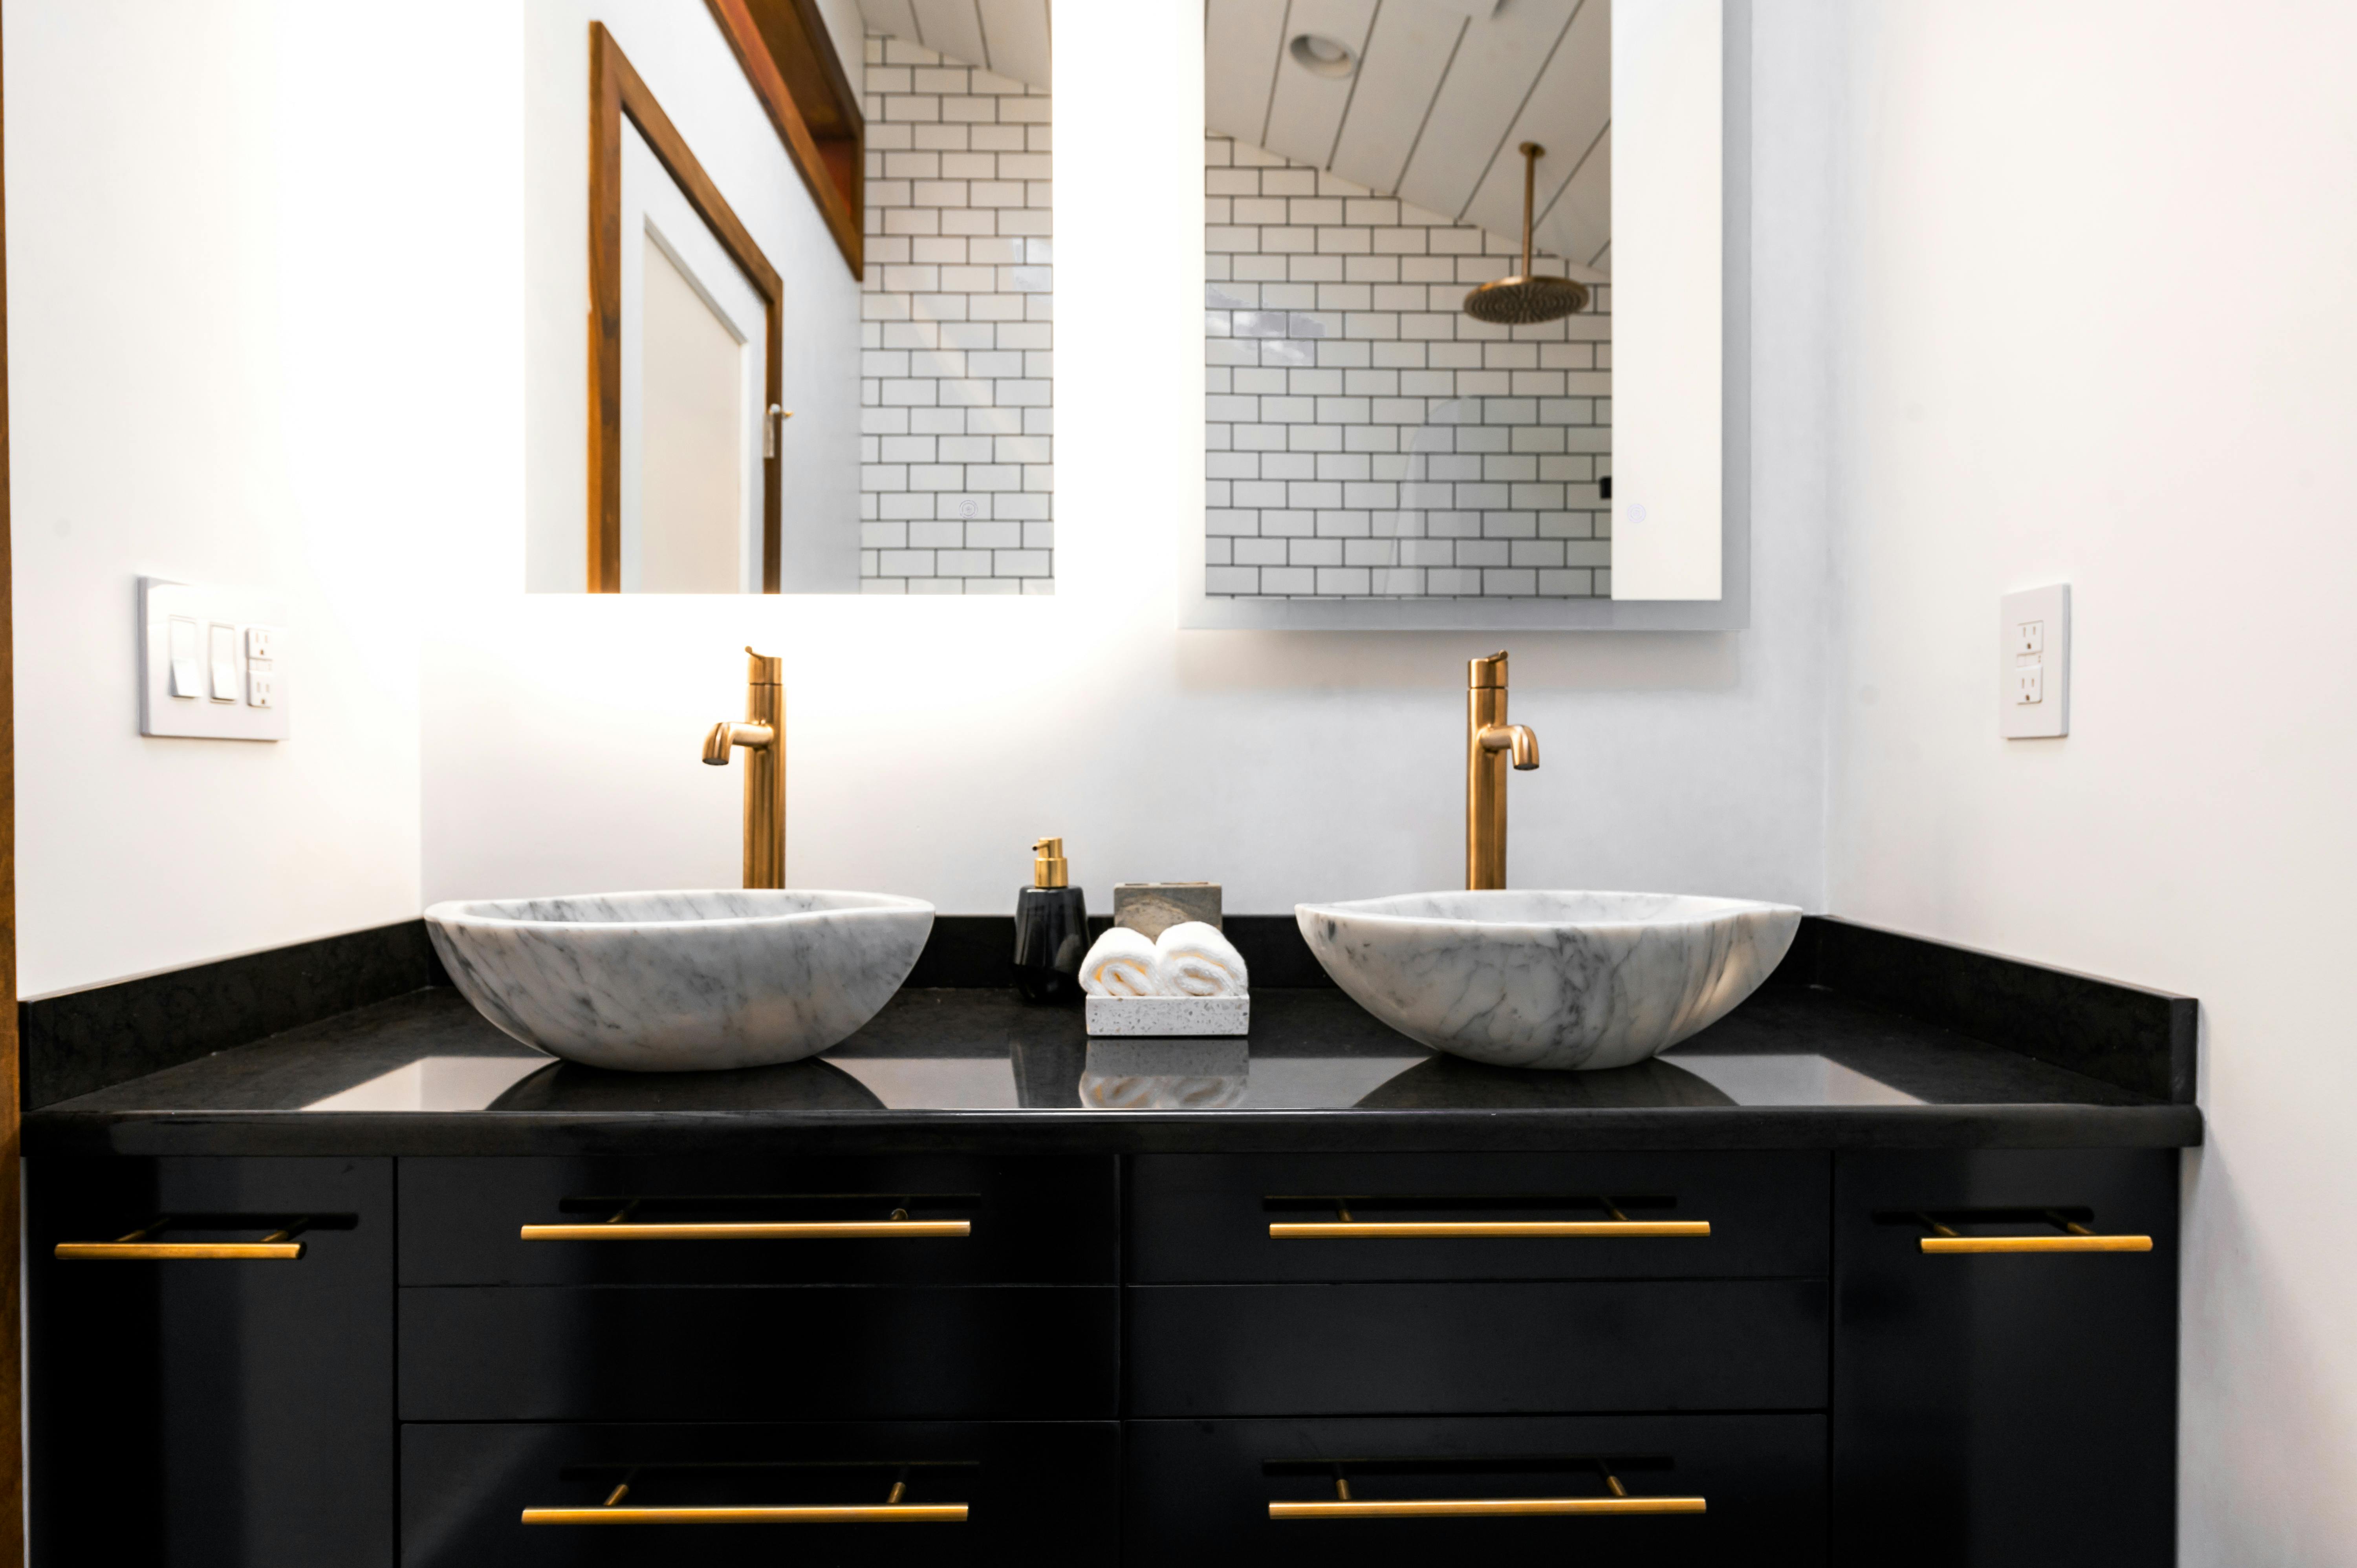 Mirrored Cabinets In A Aesthetic Bathroom